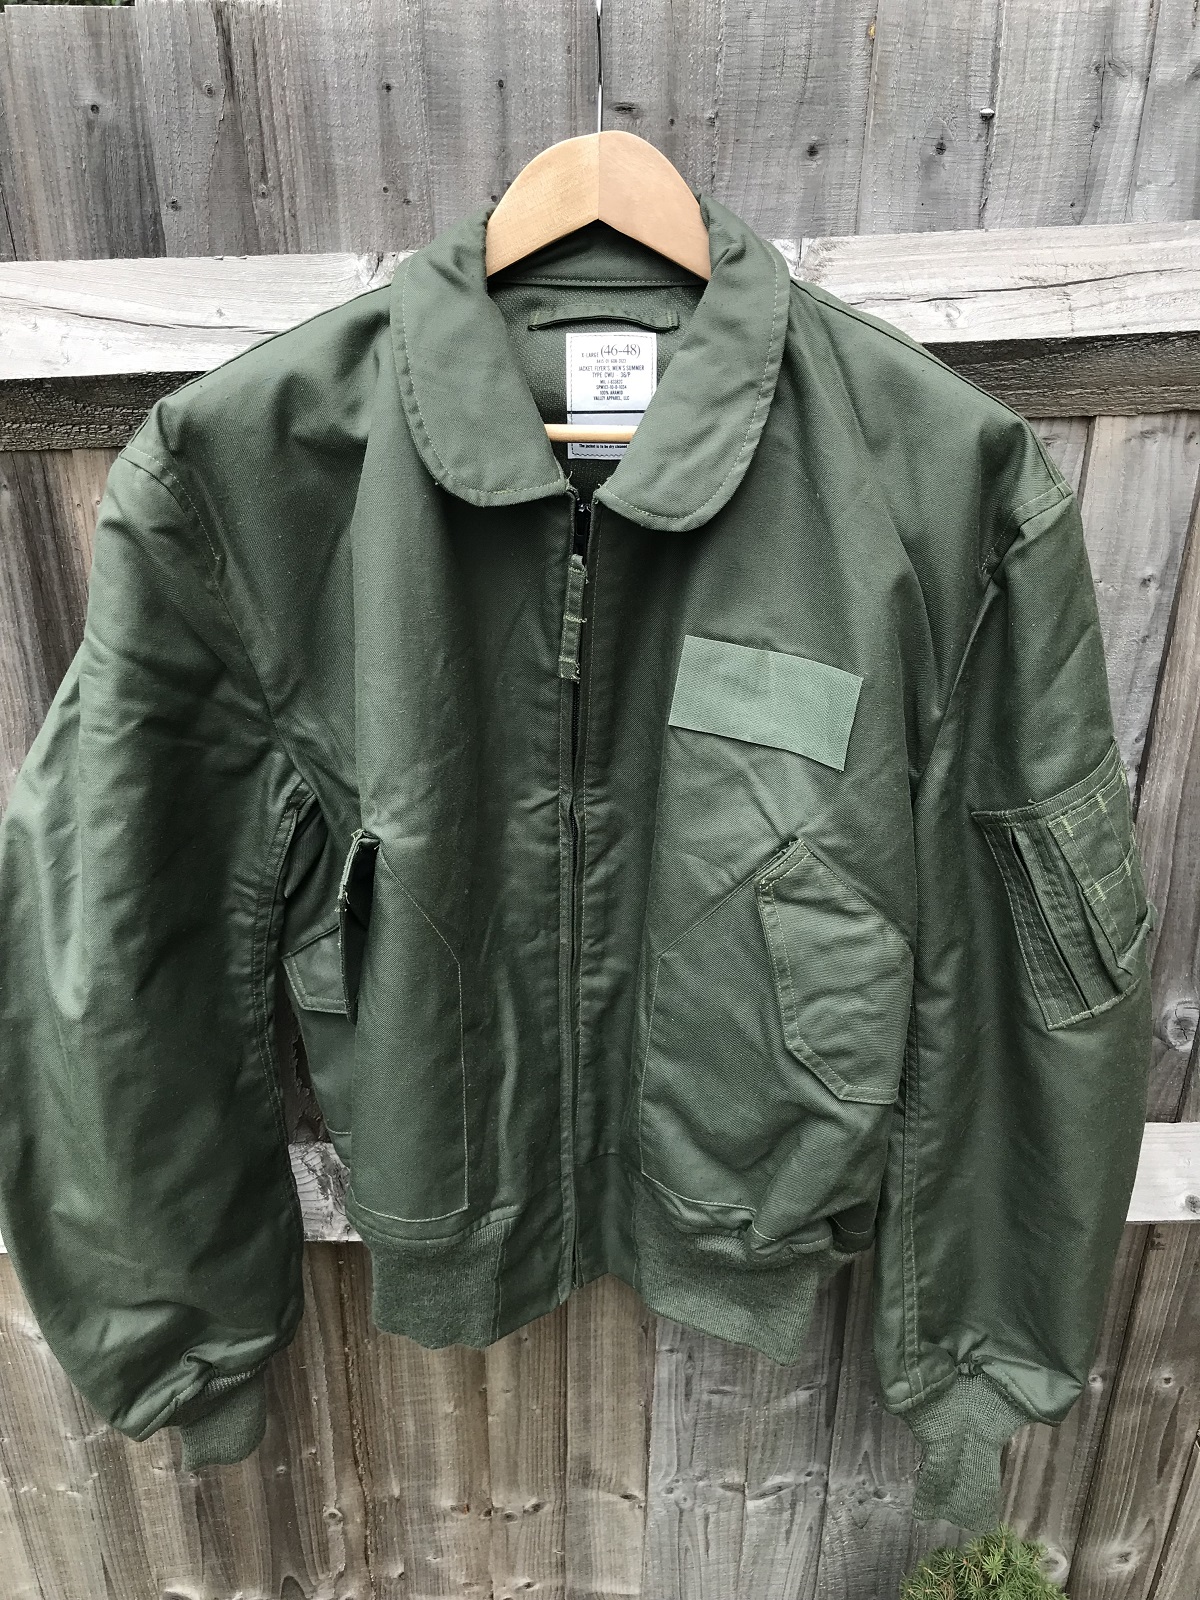 The New type CWU-36/P - a review | Vintage Leather Jackets Forum